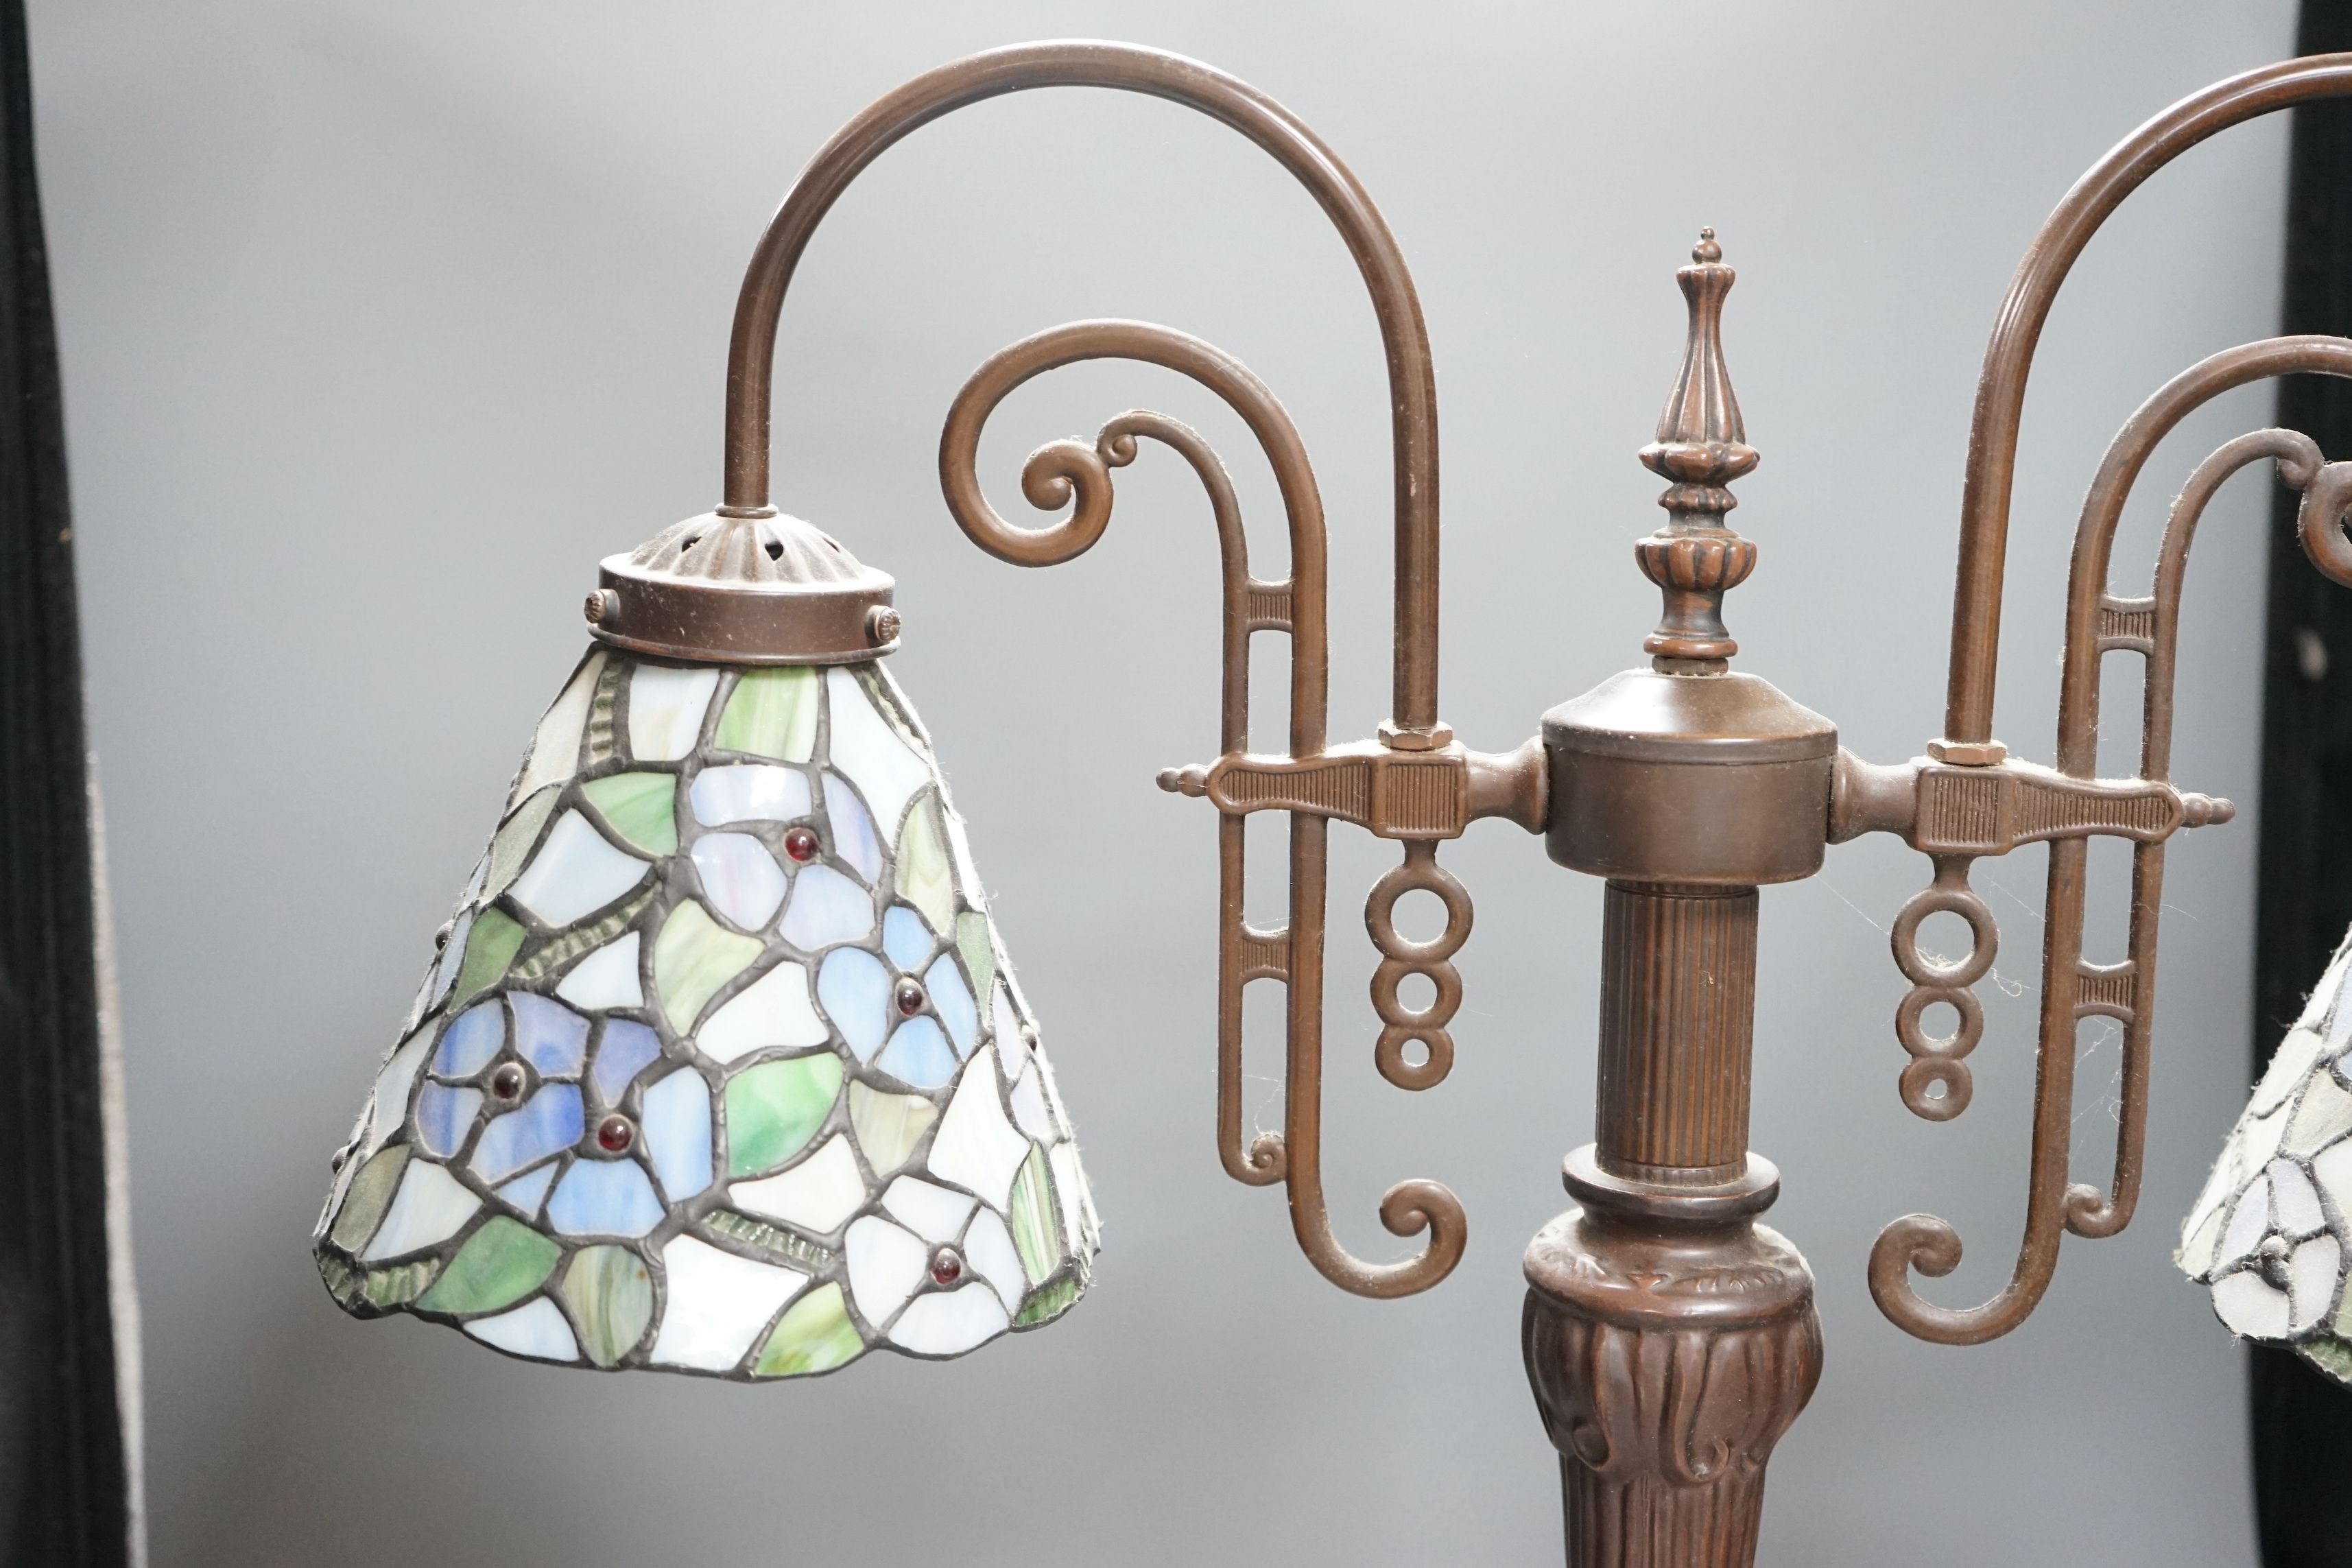 A Tiffany style two branch table lamp, 62cms high